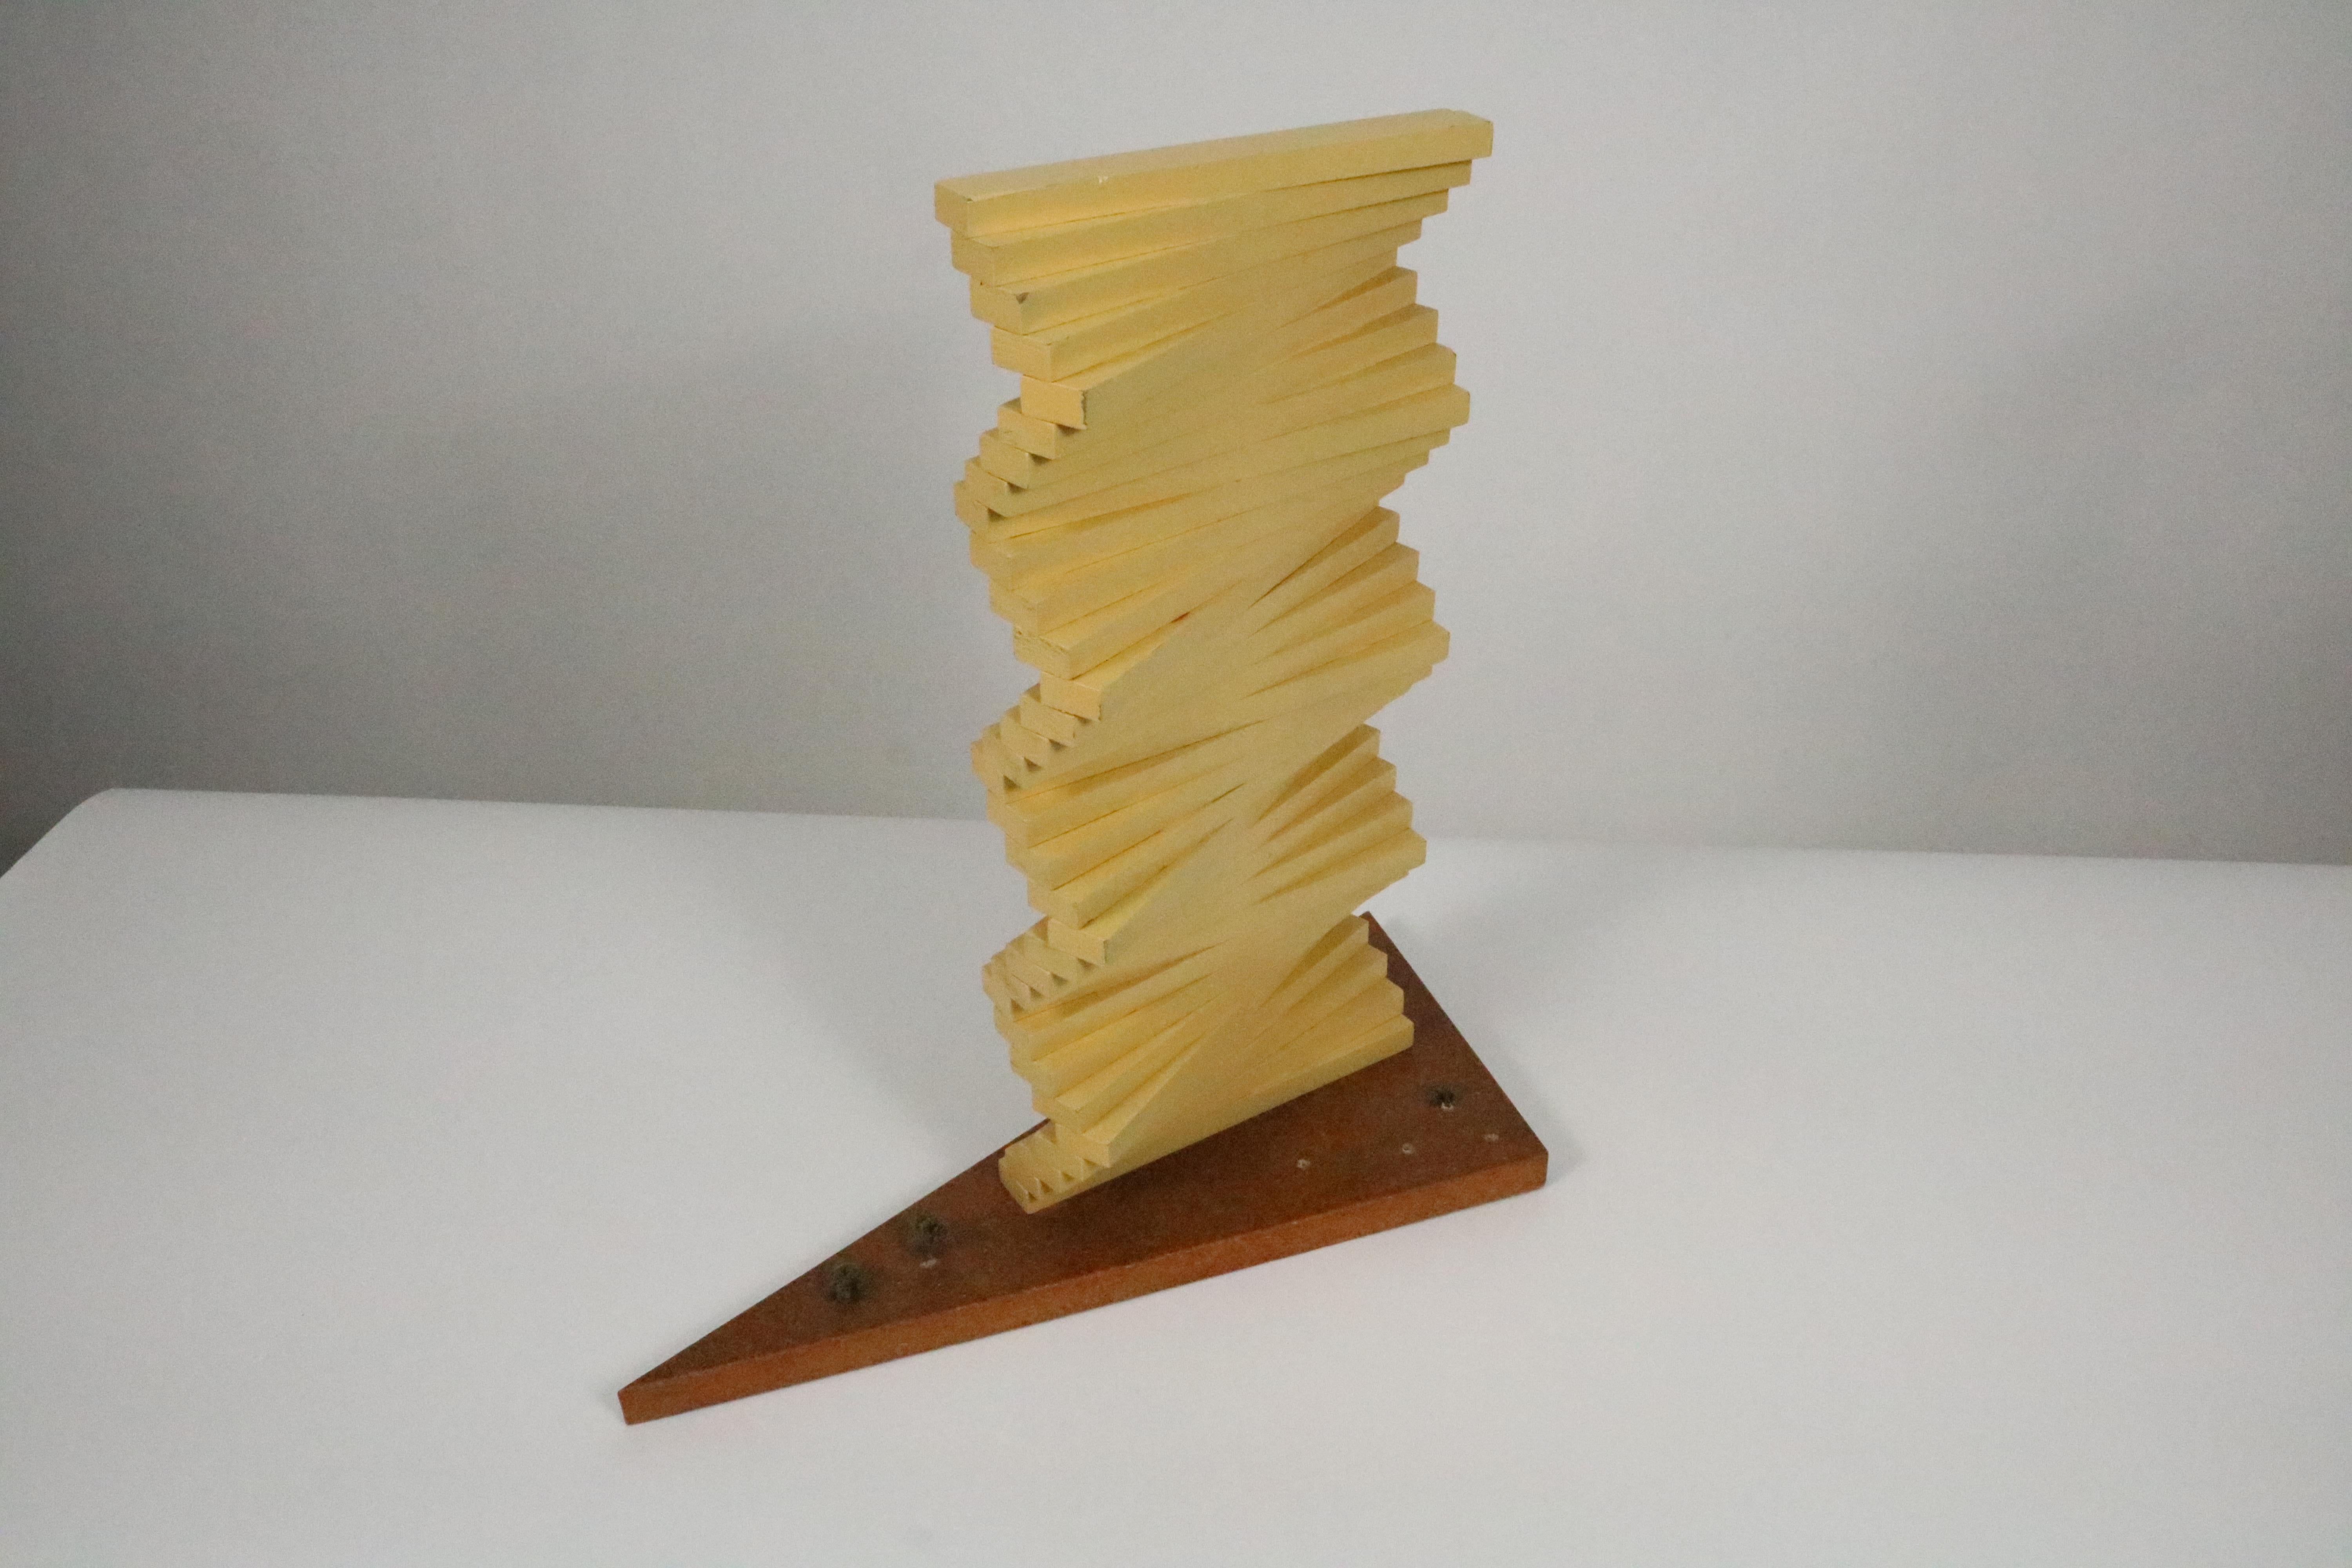 Artist's Maquette for the Articulated Wall Sculpture by Herbert Bayer 1